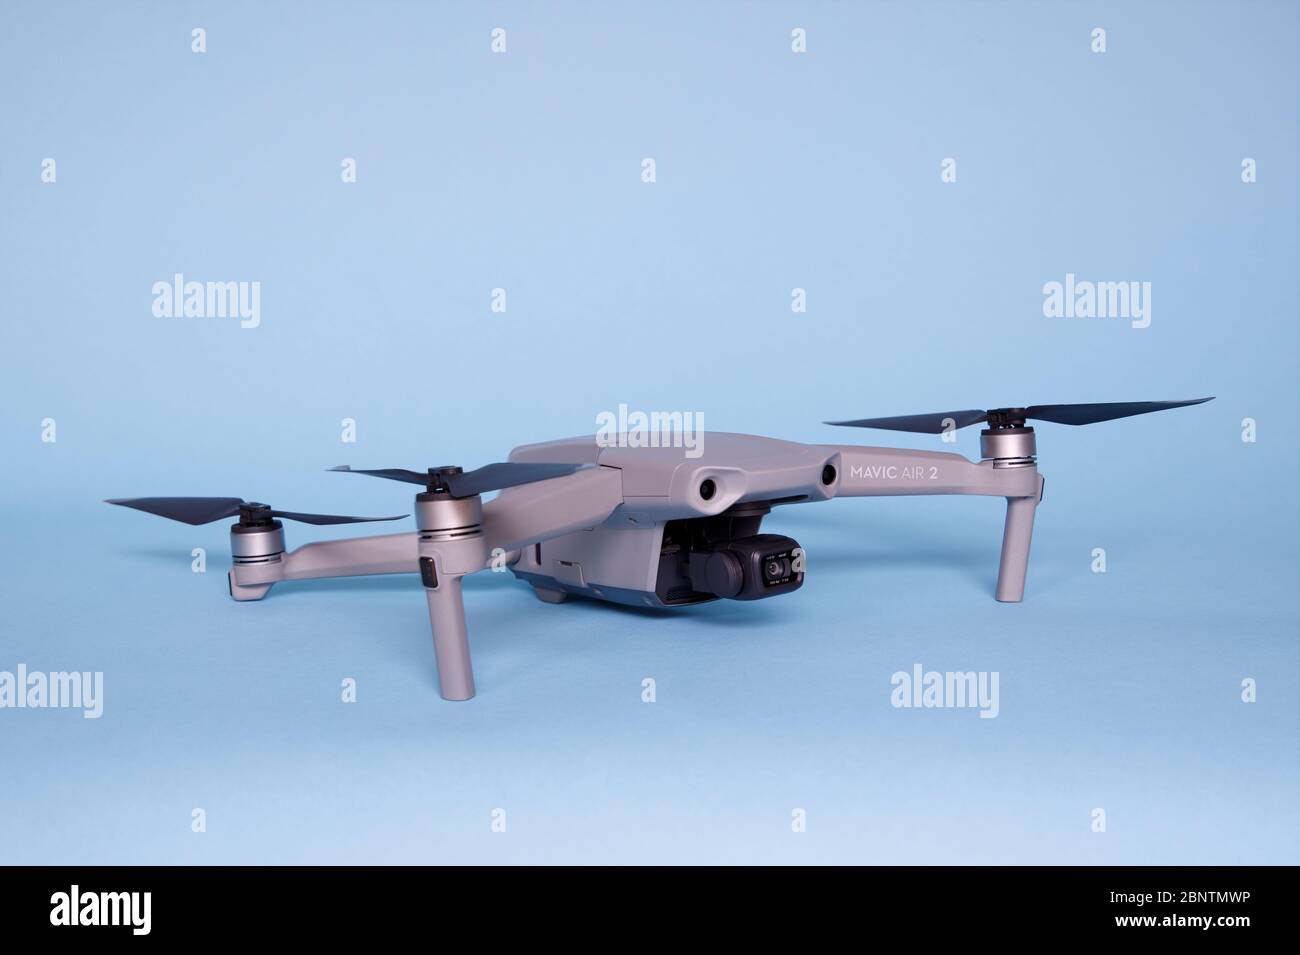 New Dji Mavic Air 2 model 2020 drone on blue background Quadcopter with 4k HDR Video HDR and 48MP photo camera. Stock Photo